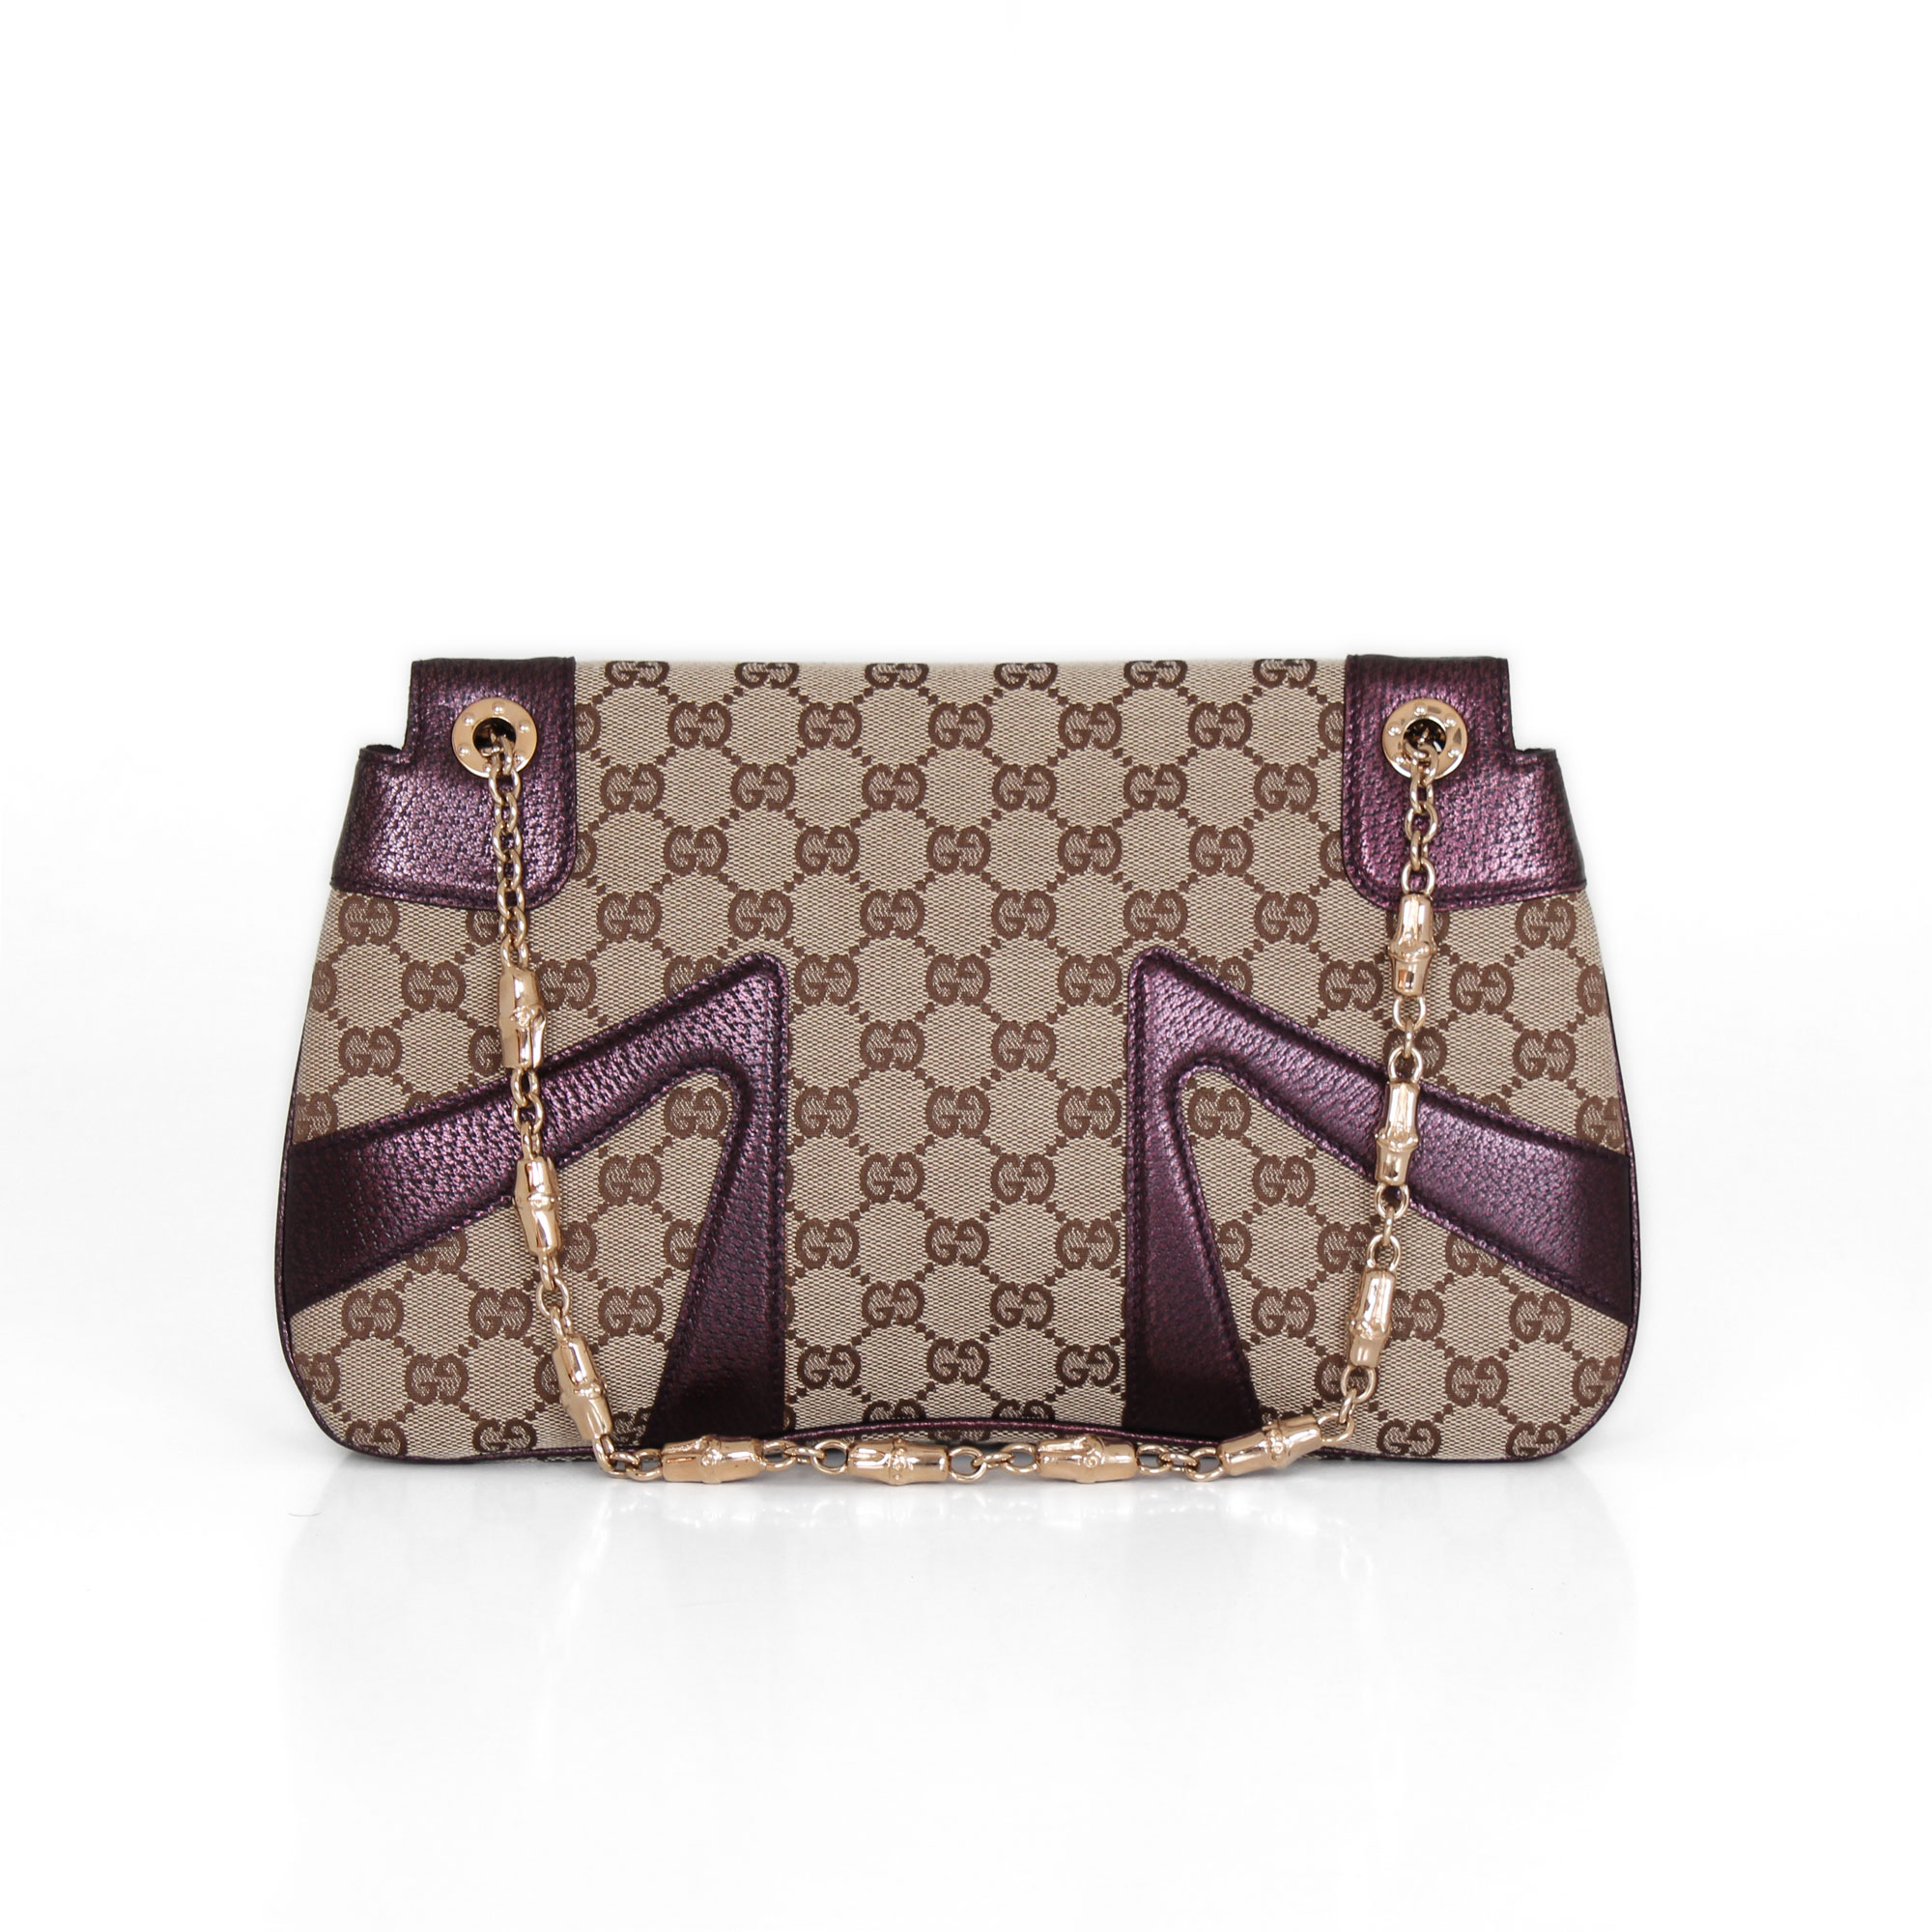 gucci limited edition bag 2019